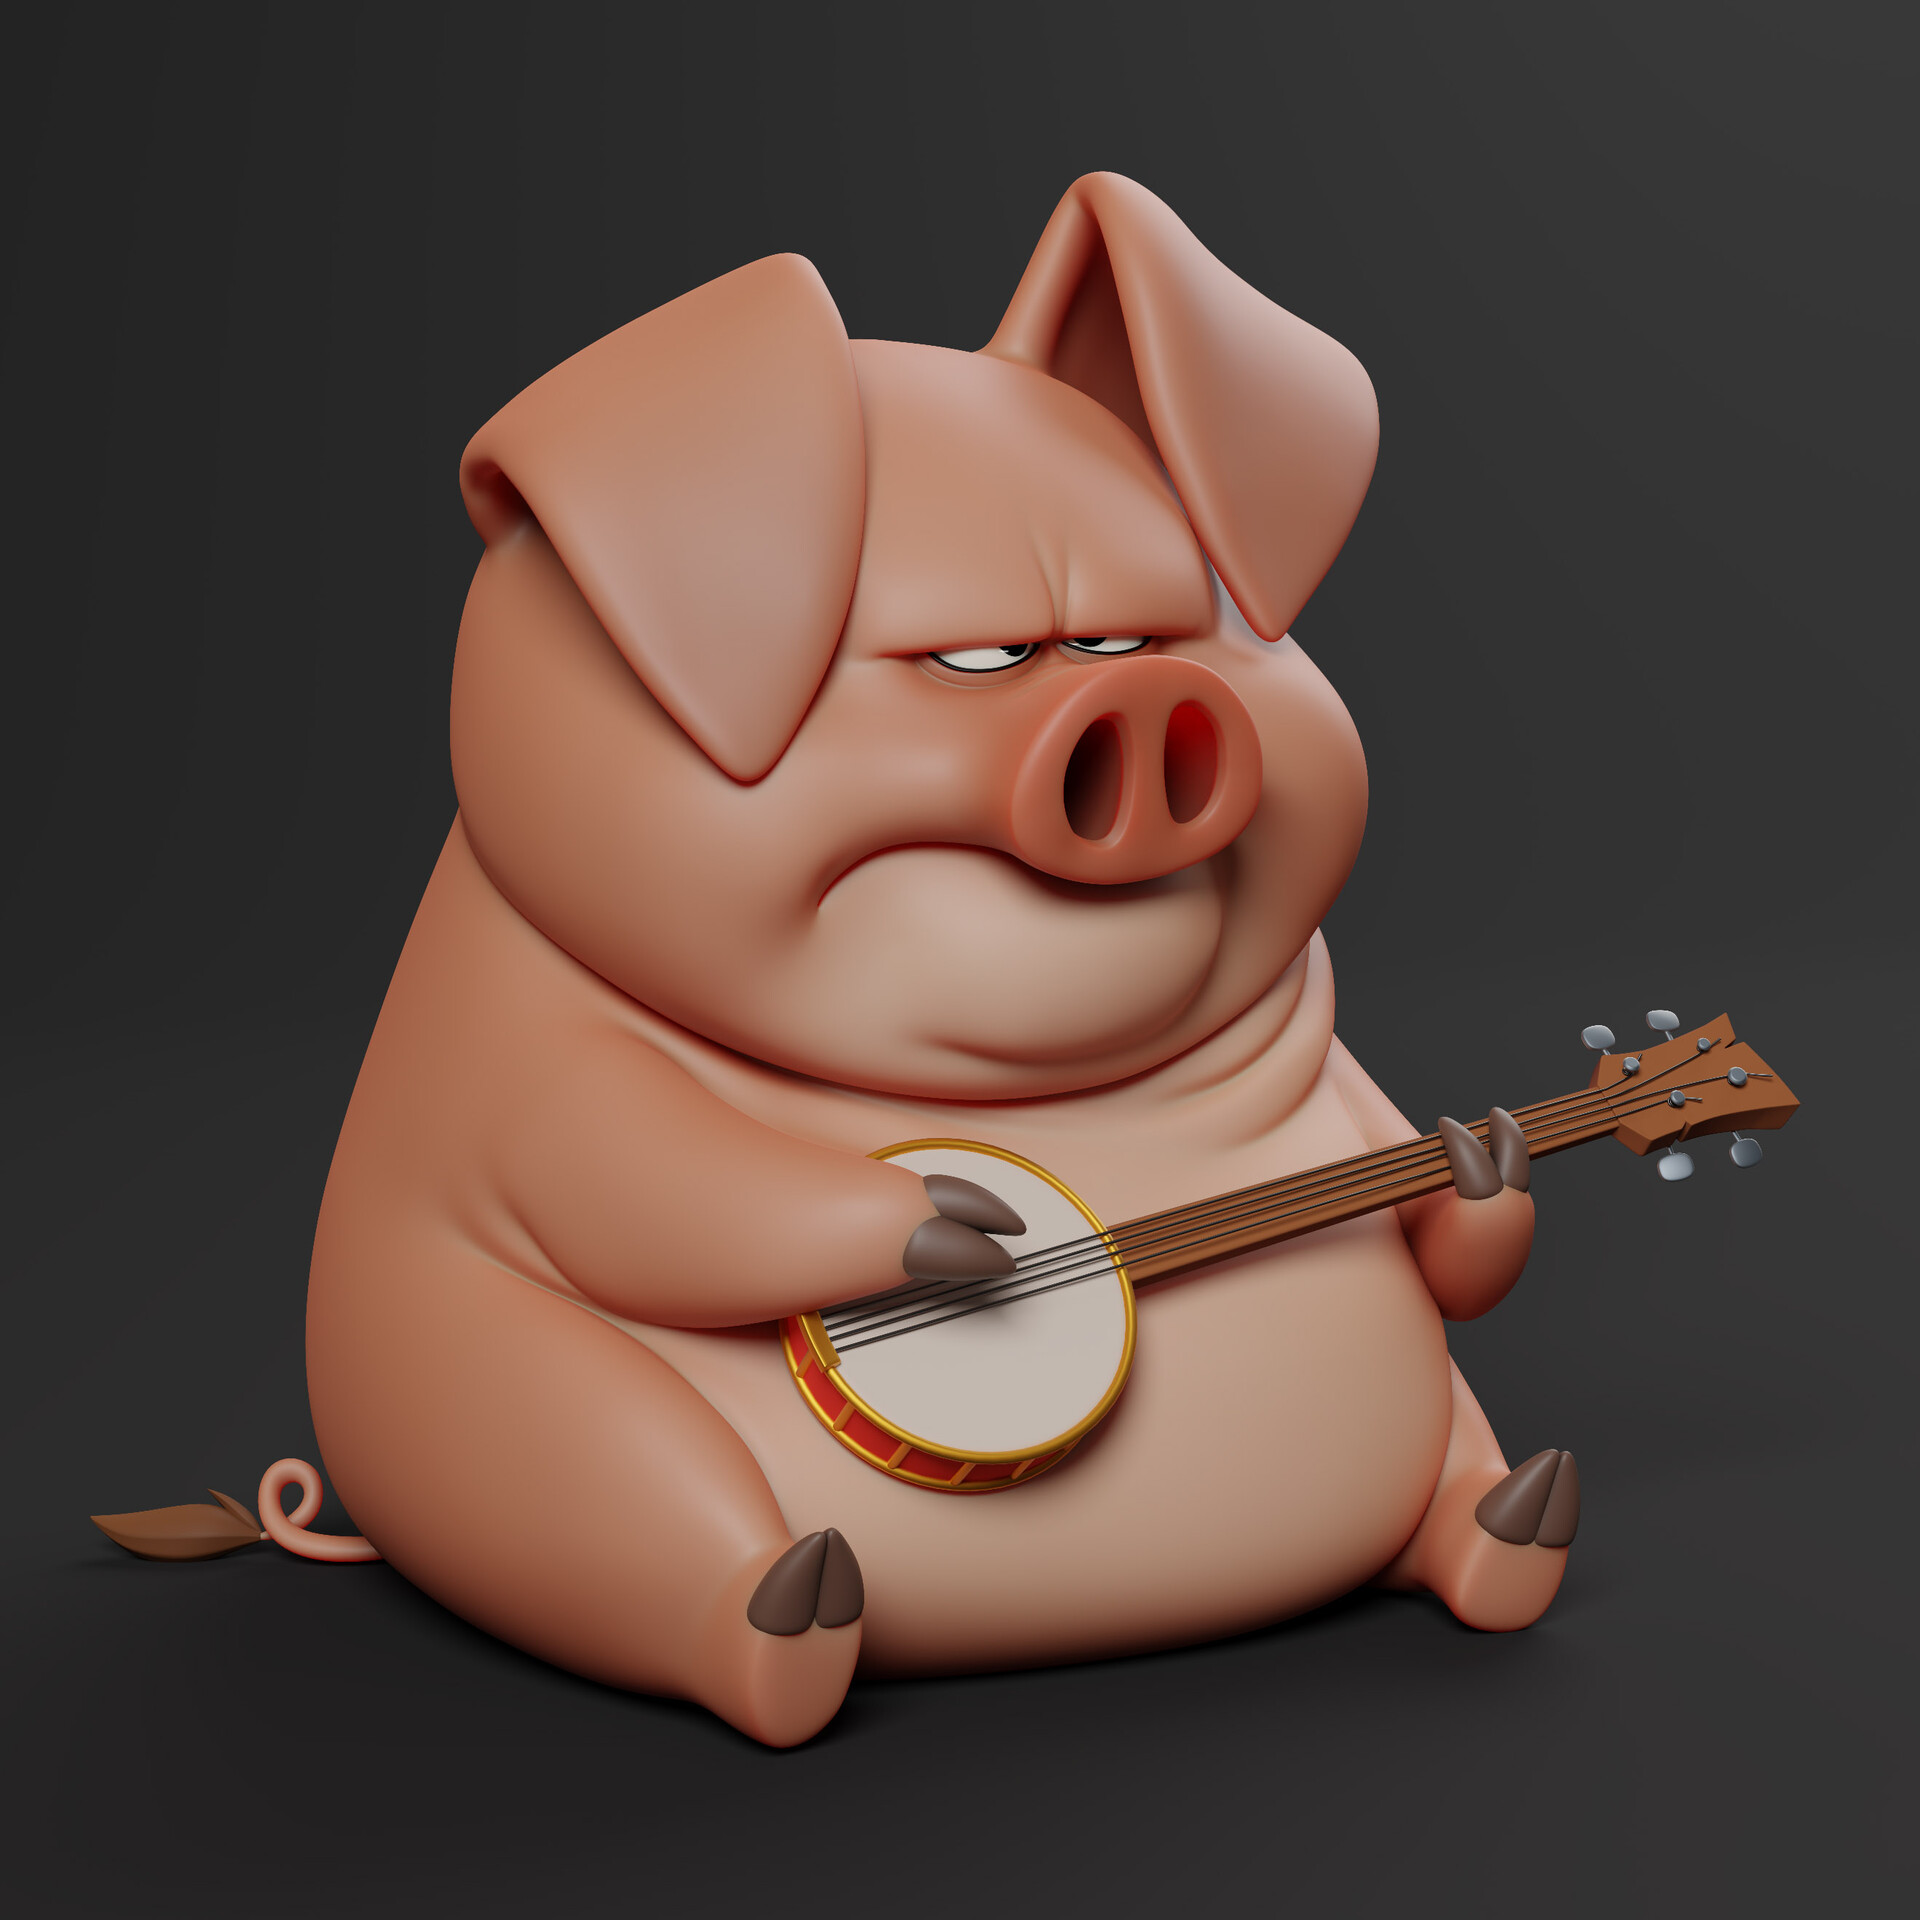 General 1920x1920 artwork animals musical instrument simple background pigs banjo gray background